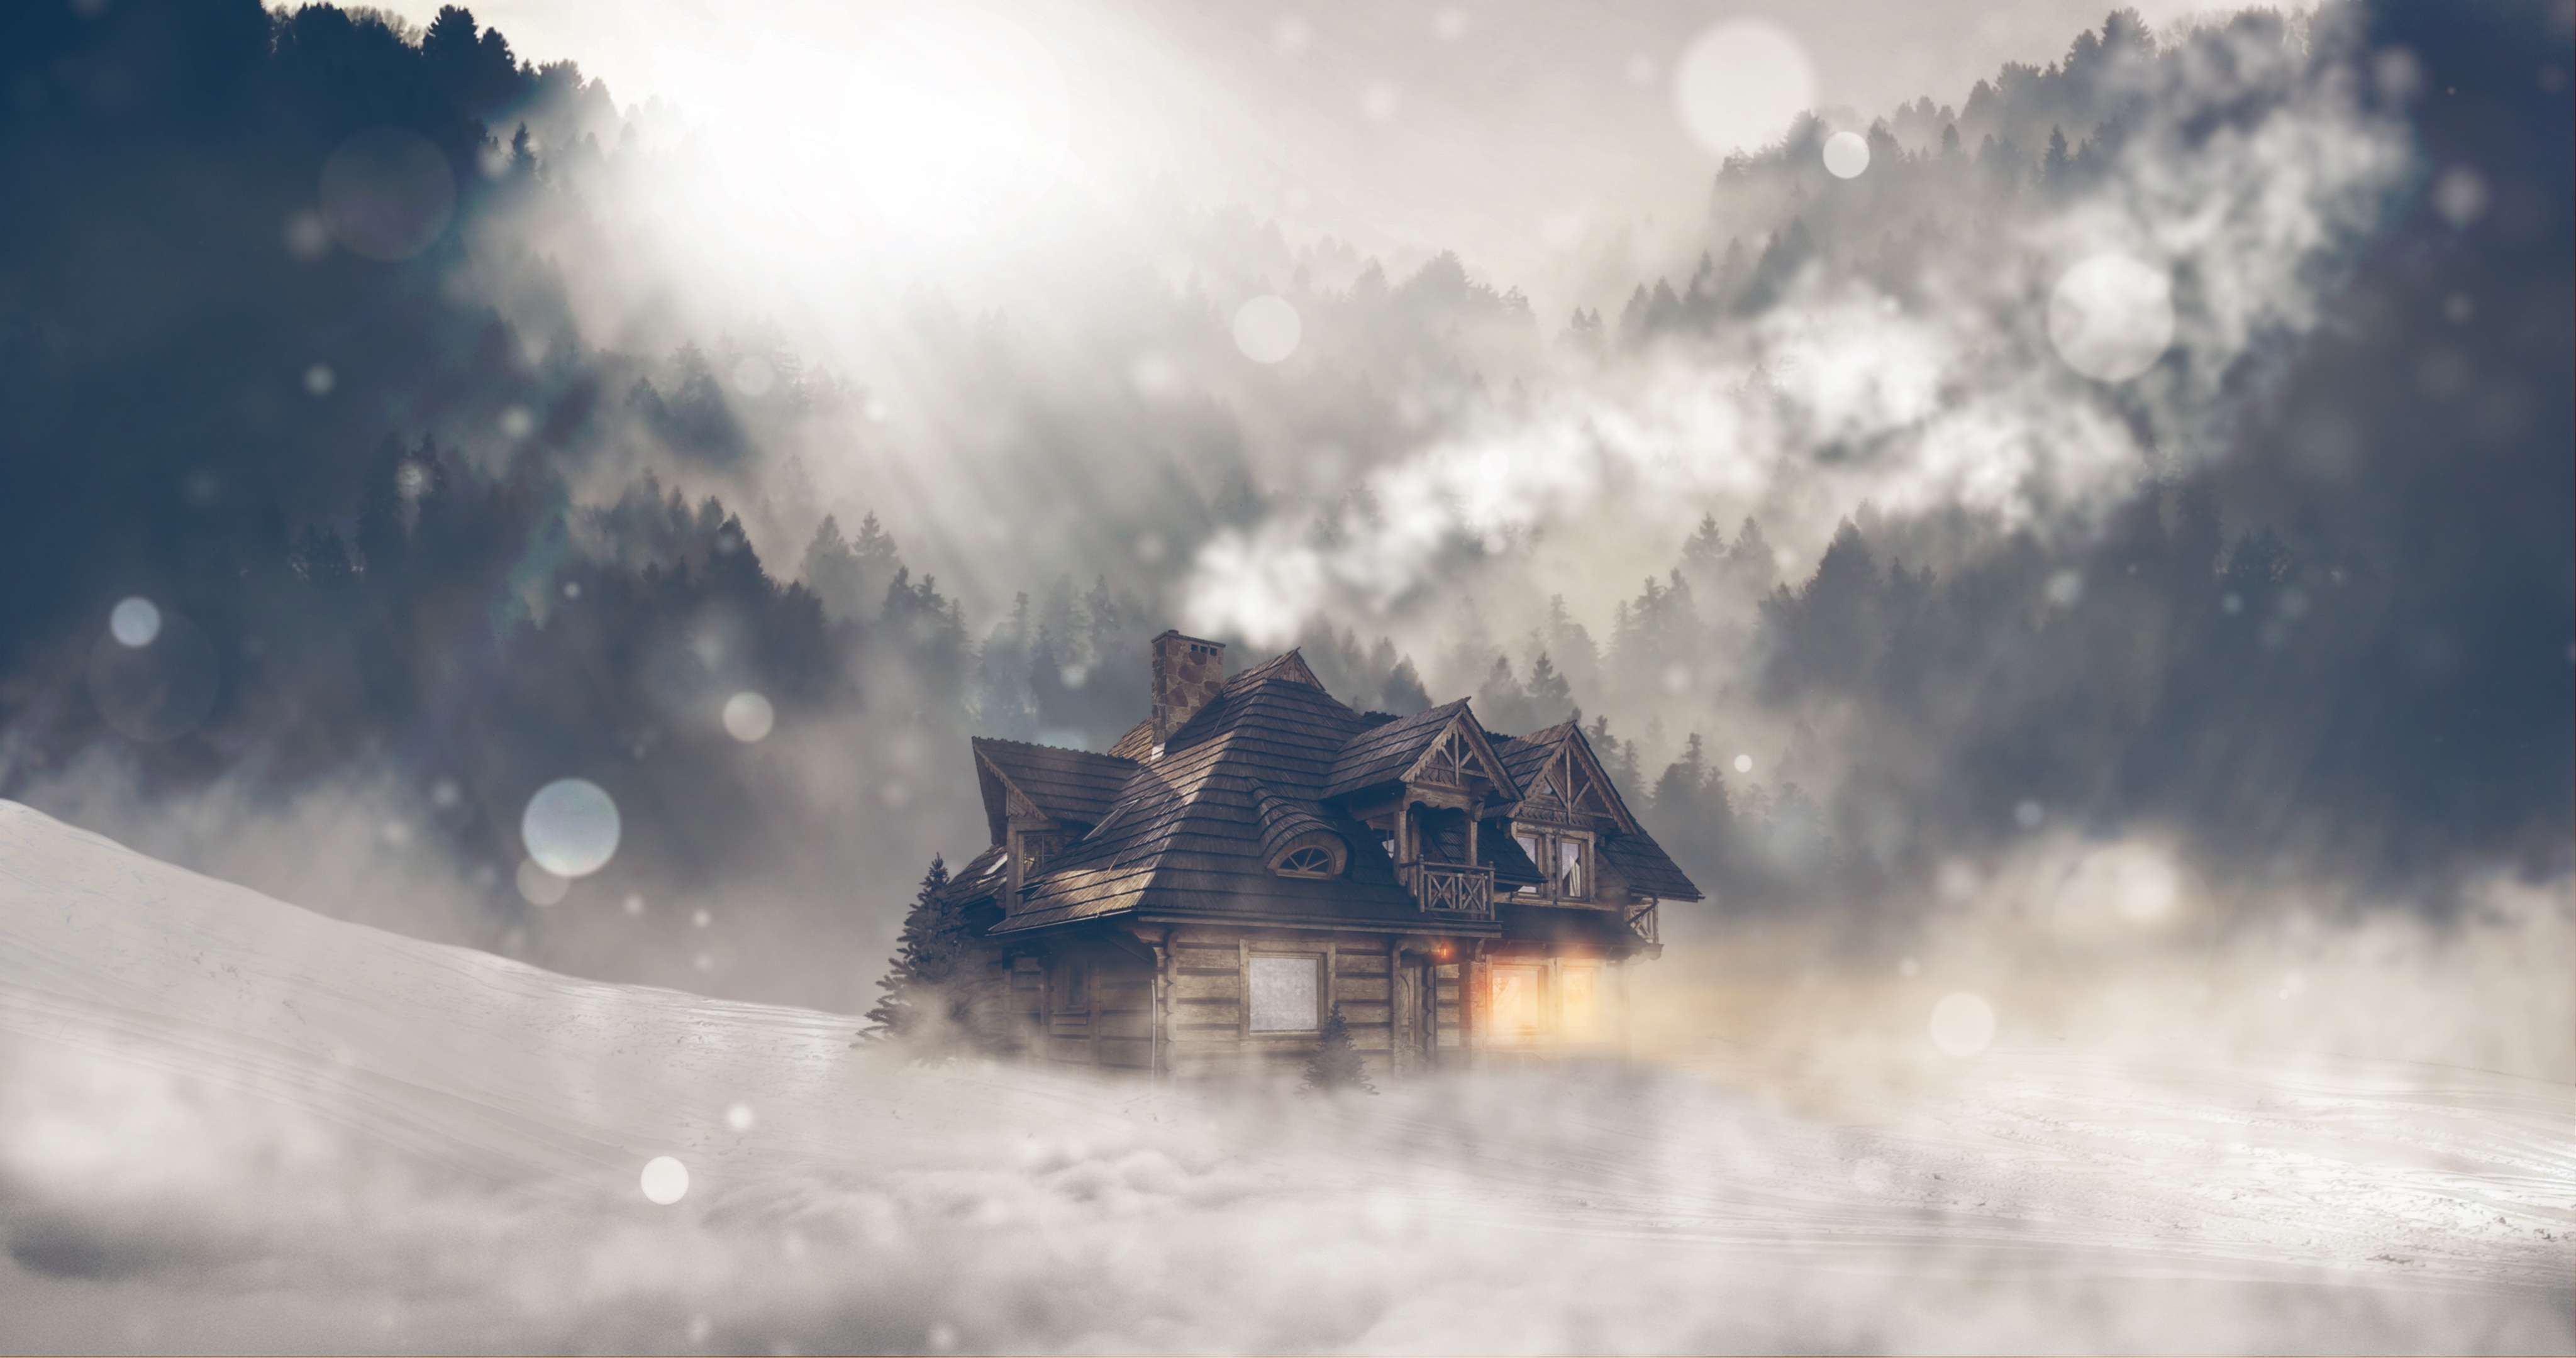 90280 download wallpaper art, glare, structure, house, photoshop, snowstorm screensavers and pictures for free